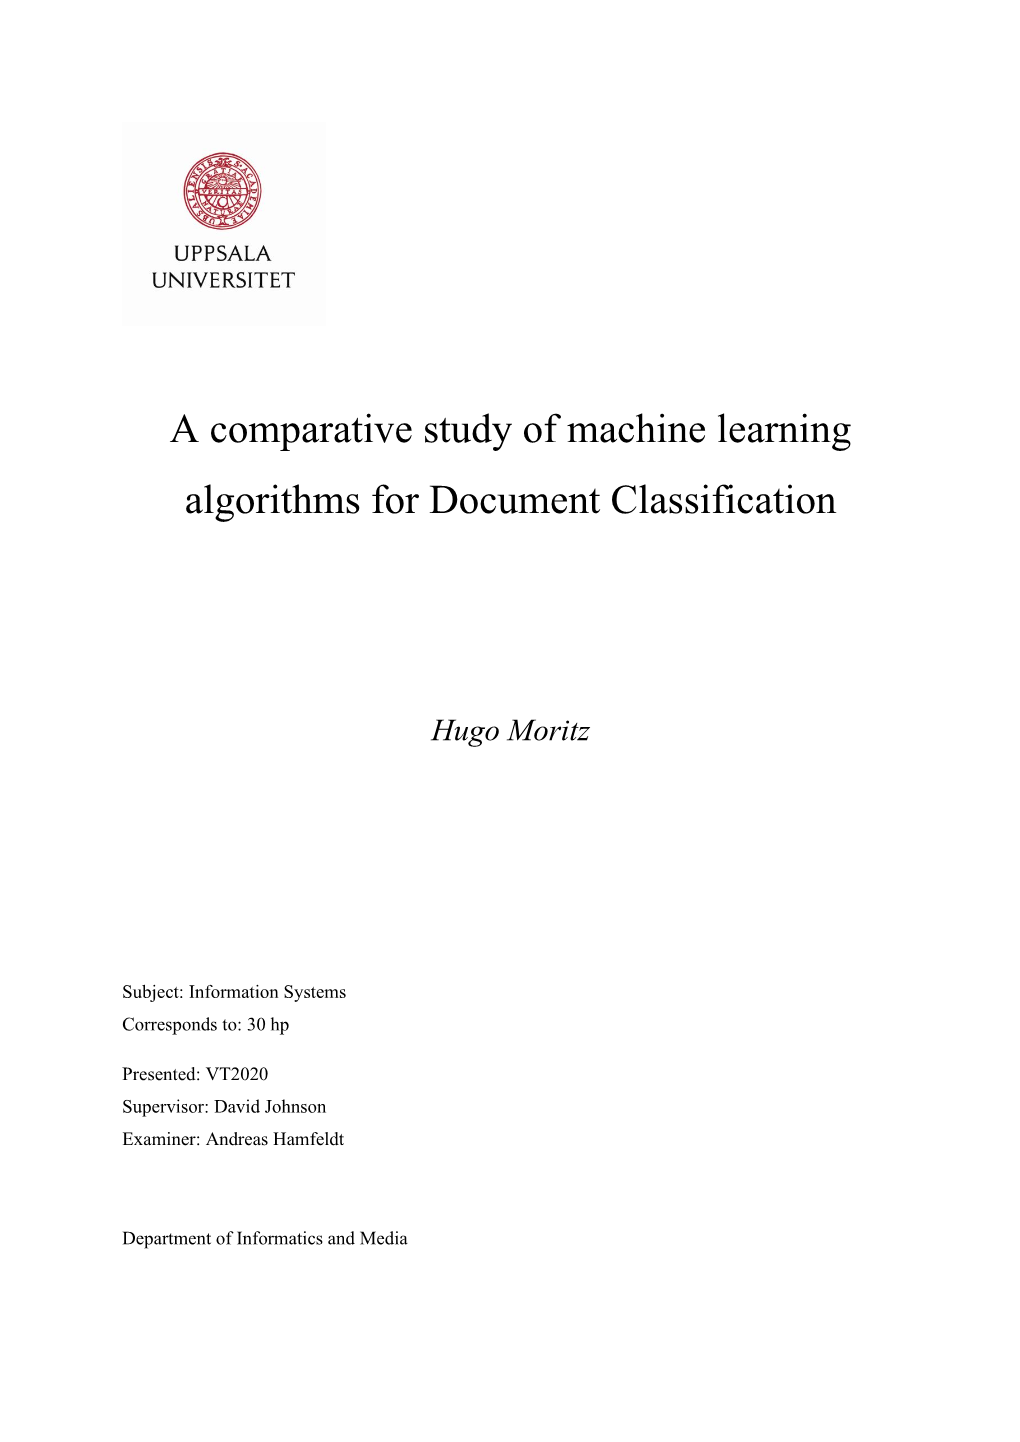 A Comparative Study of Machine Learning Algorithms for Document Classification